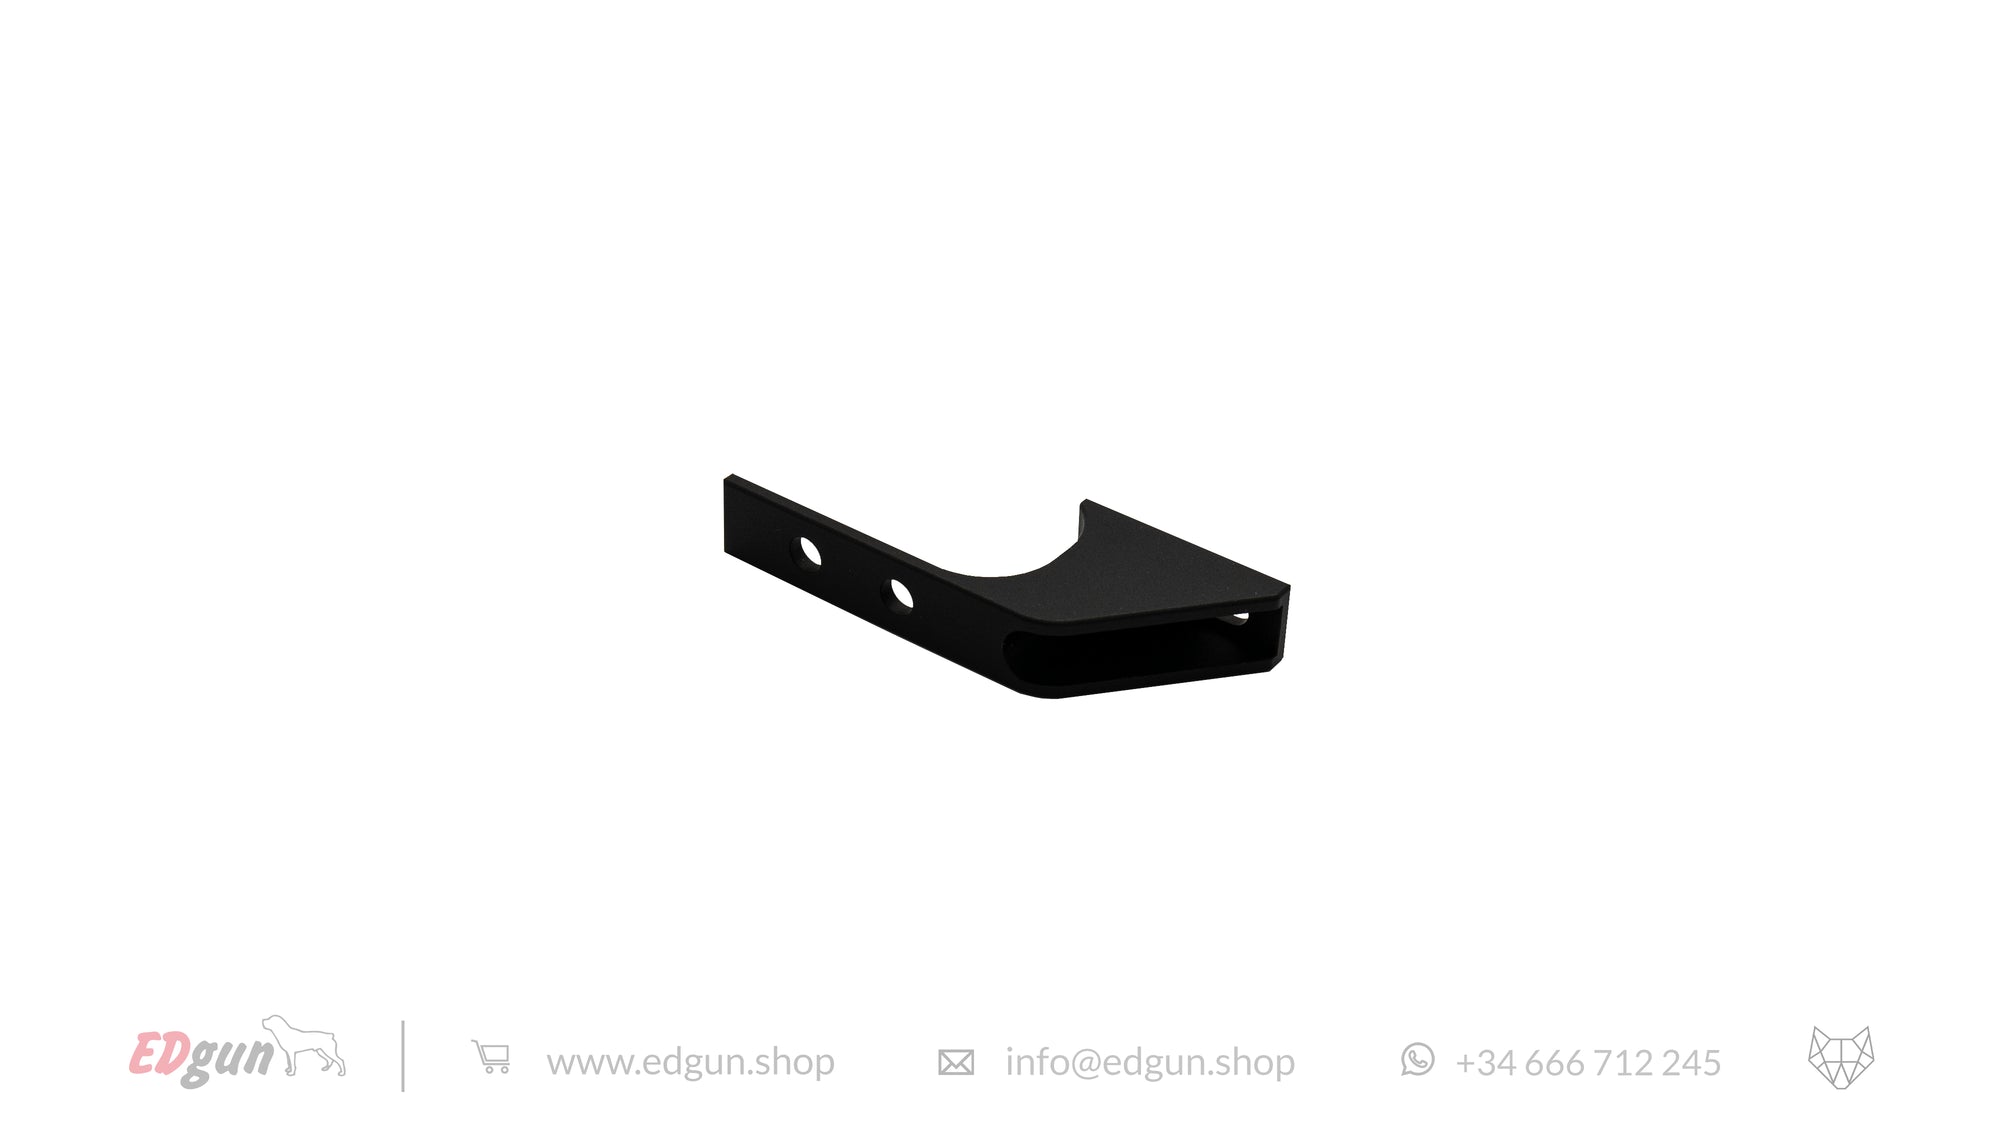 Trigger Guard KL200009 for R5 and R5M